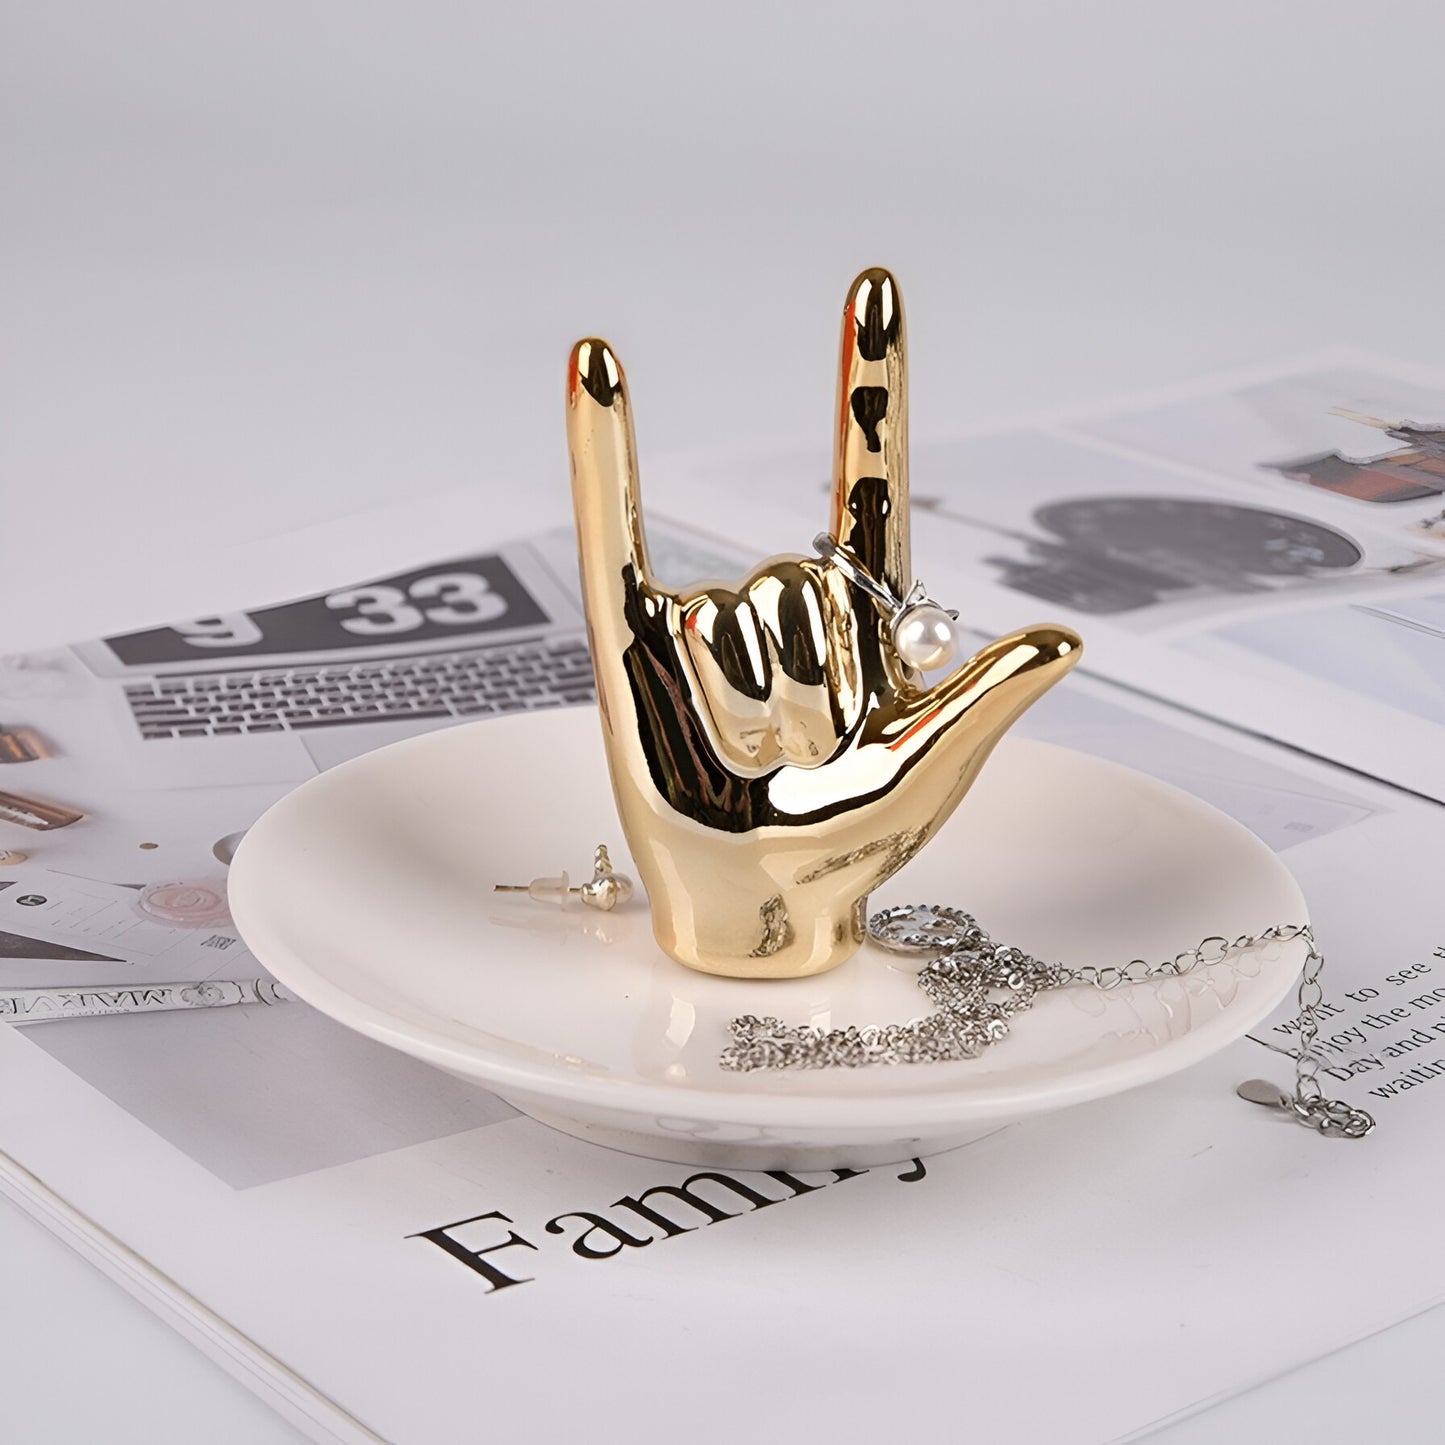 Nordic Style Ceramic Hand Gesture Ring Holder, 3.94 x 3.93 x 3.15 Inches, Creative Vanity Storage Tray for Hand Display, Bedroom Vanity Decor, Ideal Gift for Women, Birthdays, Valentine's Day, Mother's Day